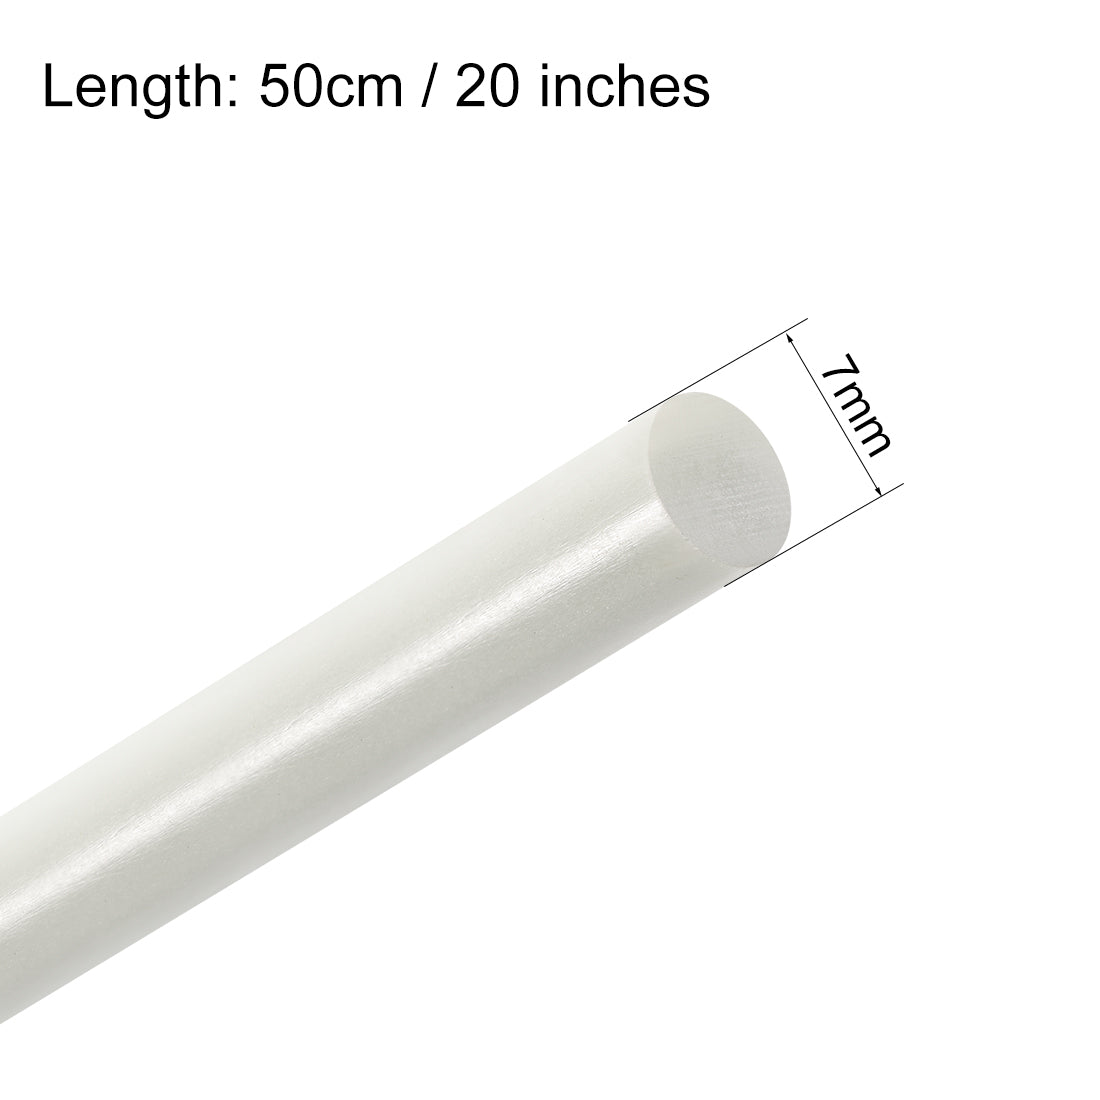 uxcell Uxcell FRP Fiberglass Round Rod,7mm Dia 50cm Long,White Engineering Round Bars Rods